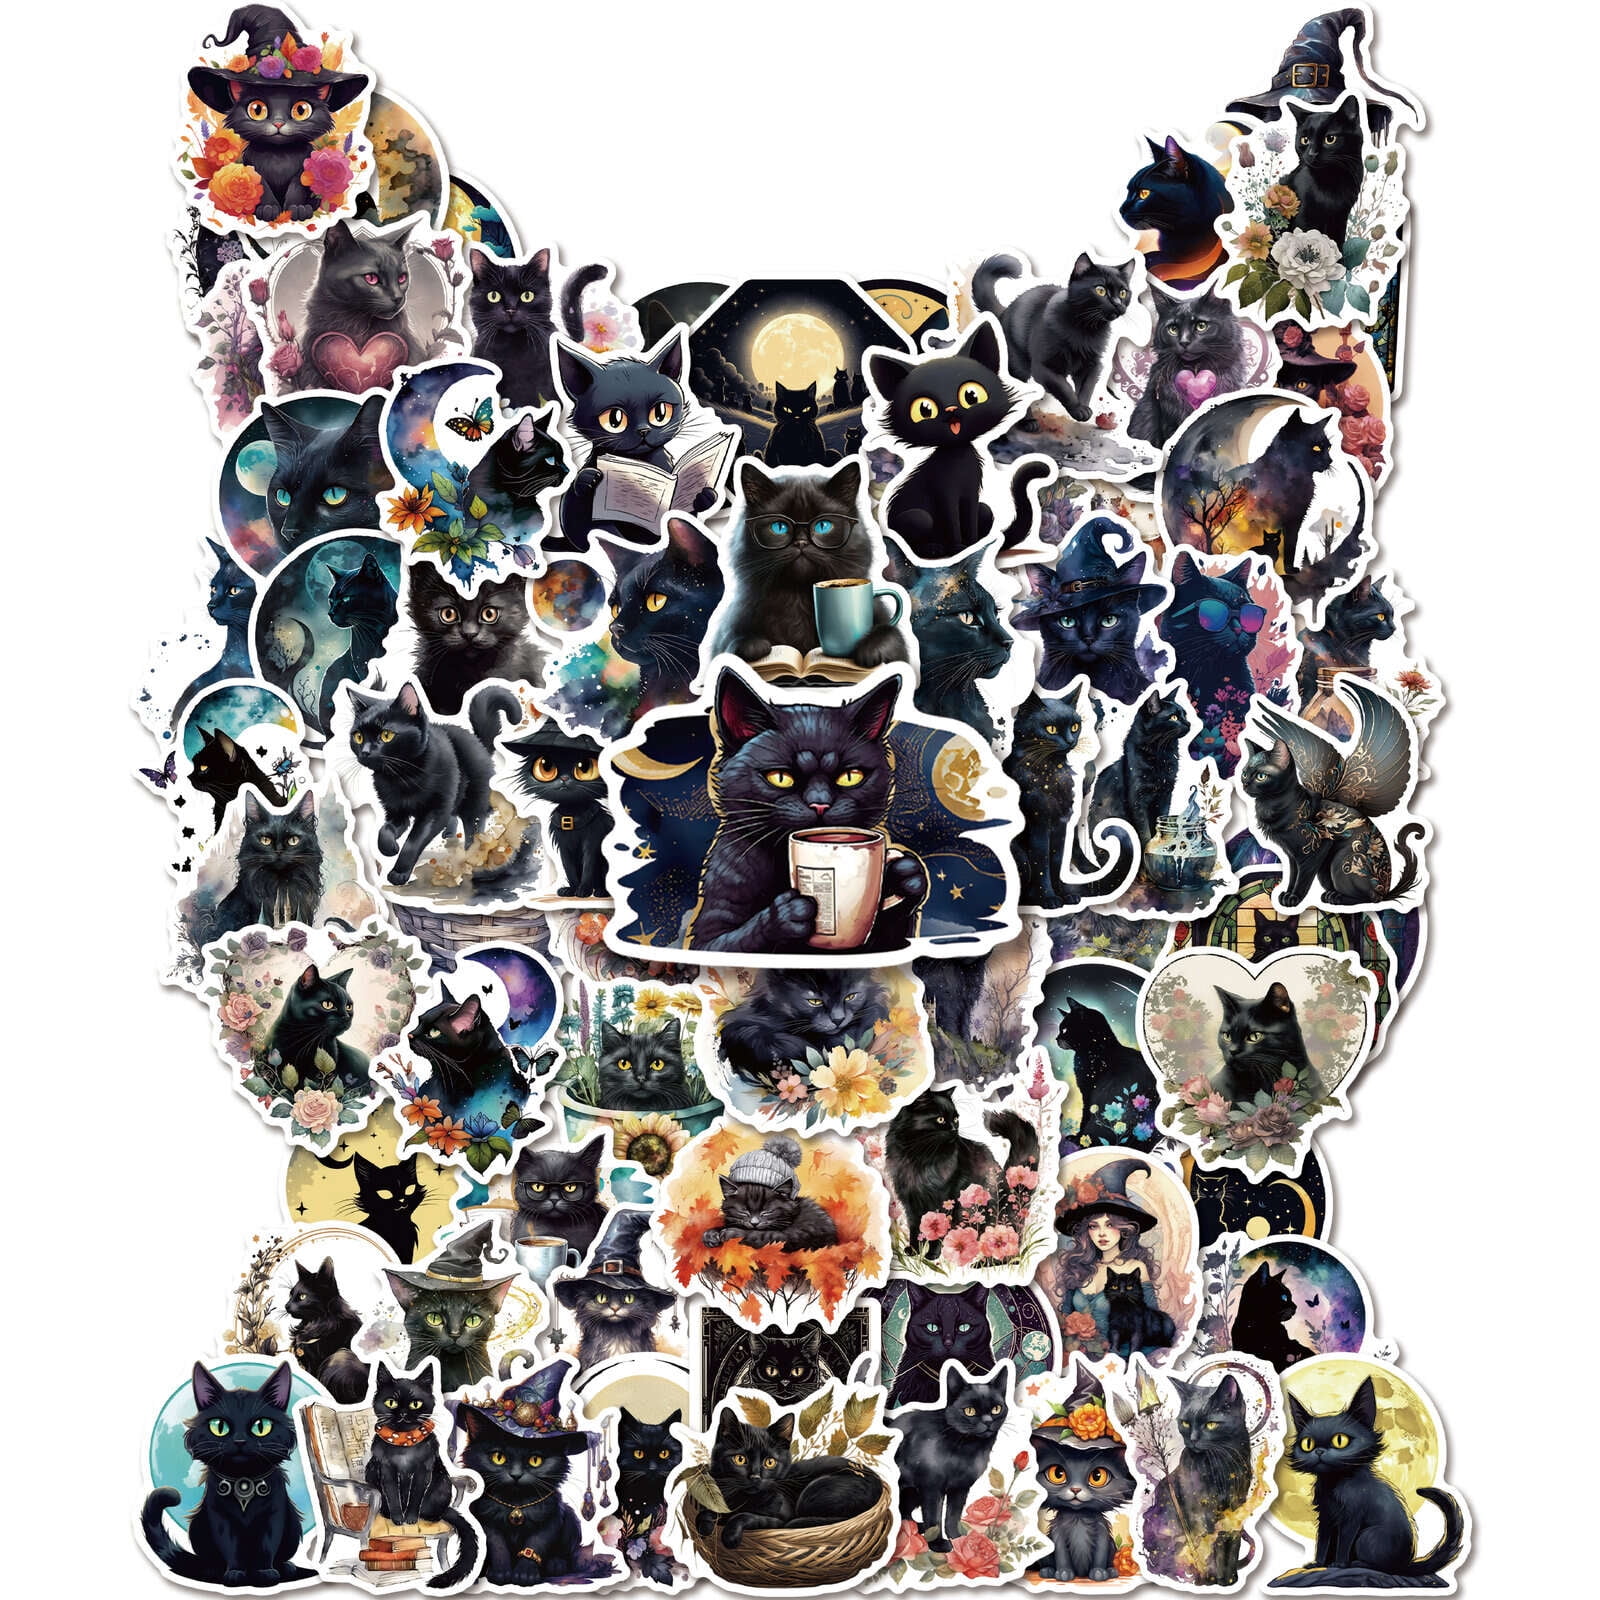 MiStar 100 PCS Black Cat Stickers, 3.15 Cat Stickers Pack, Aesthetic Vinyl  Waterproof Stickers for Water Bottles Laptop Phone Case Luggage Car, Black  Cat Decor Decal for Halloween 